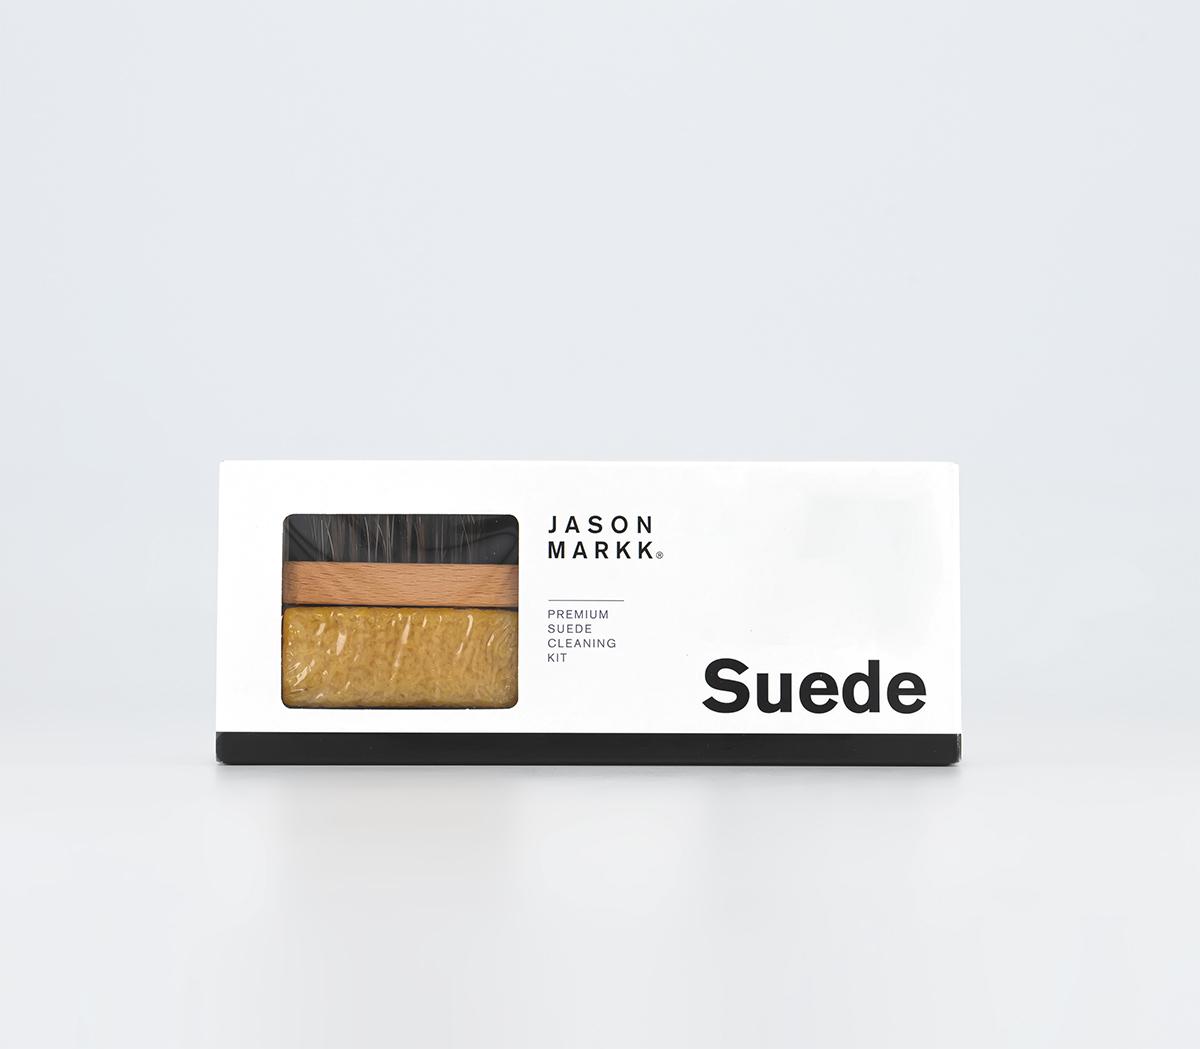 jason markk suede cleaning kit review